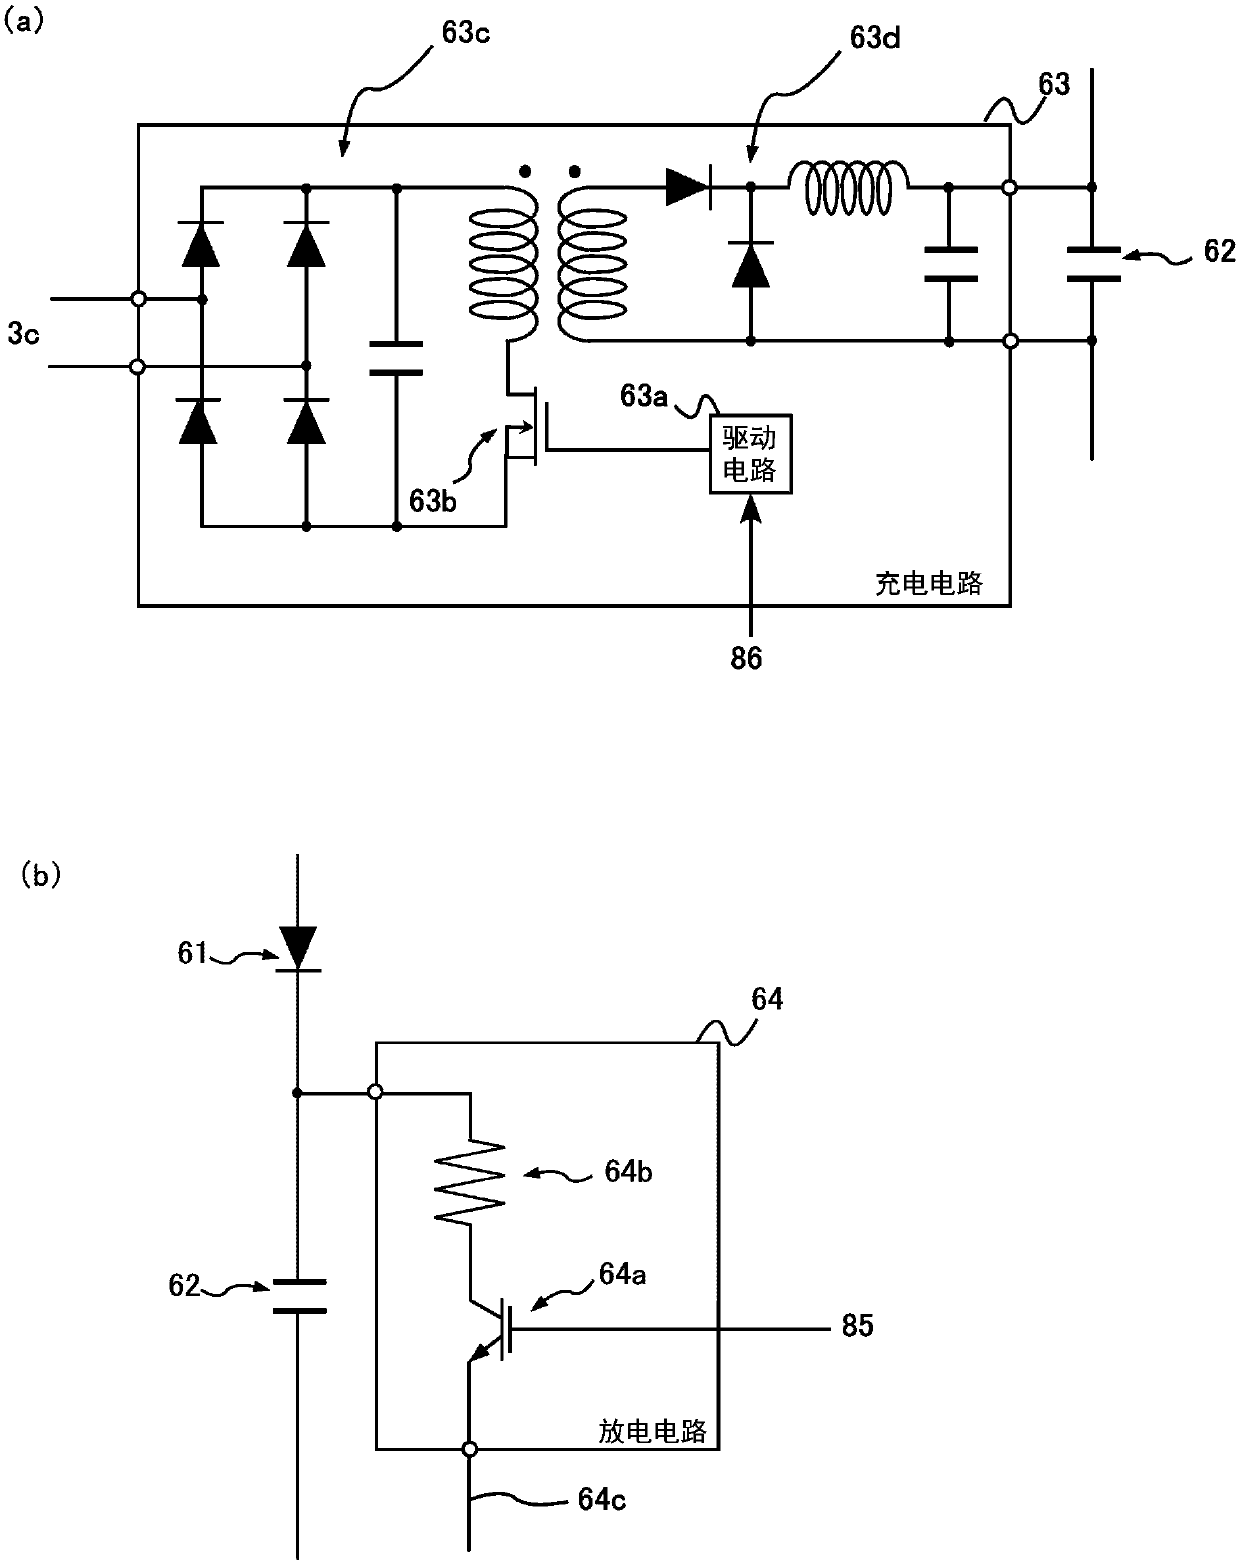 Shielded metal arc welding system and welding power supply for shielded metal arc welding